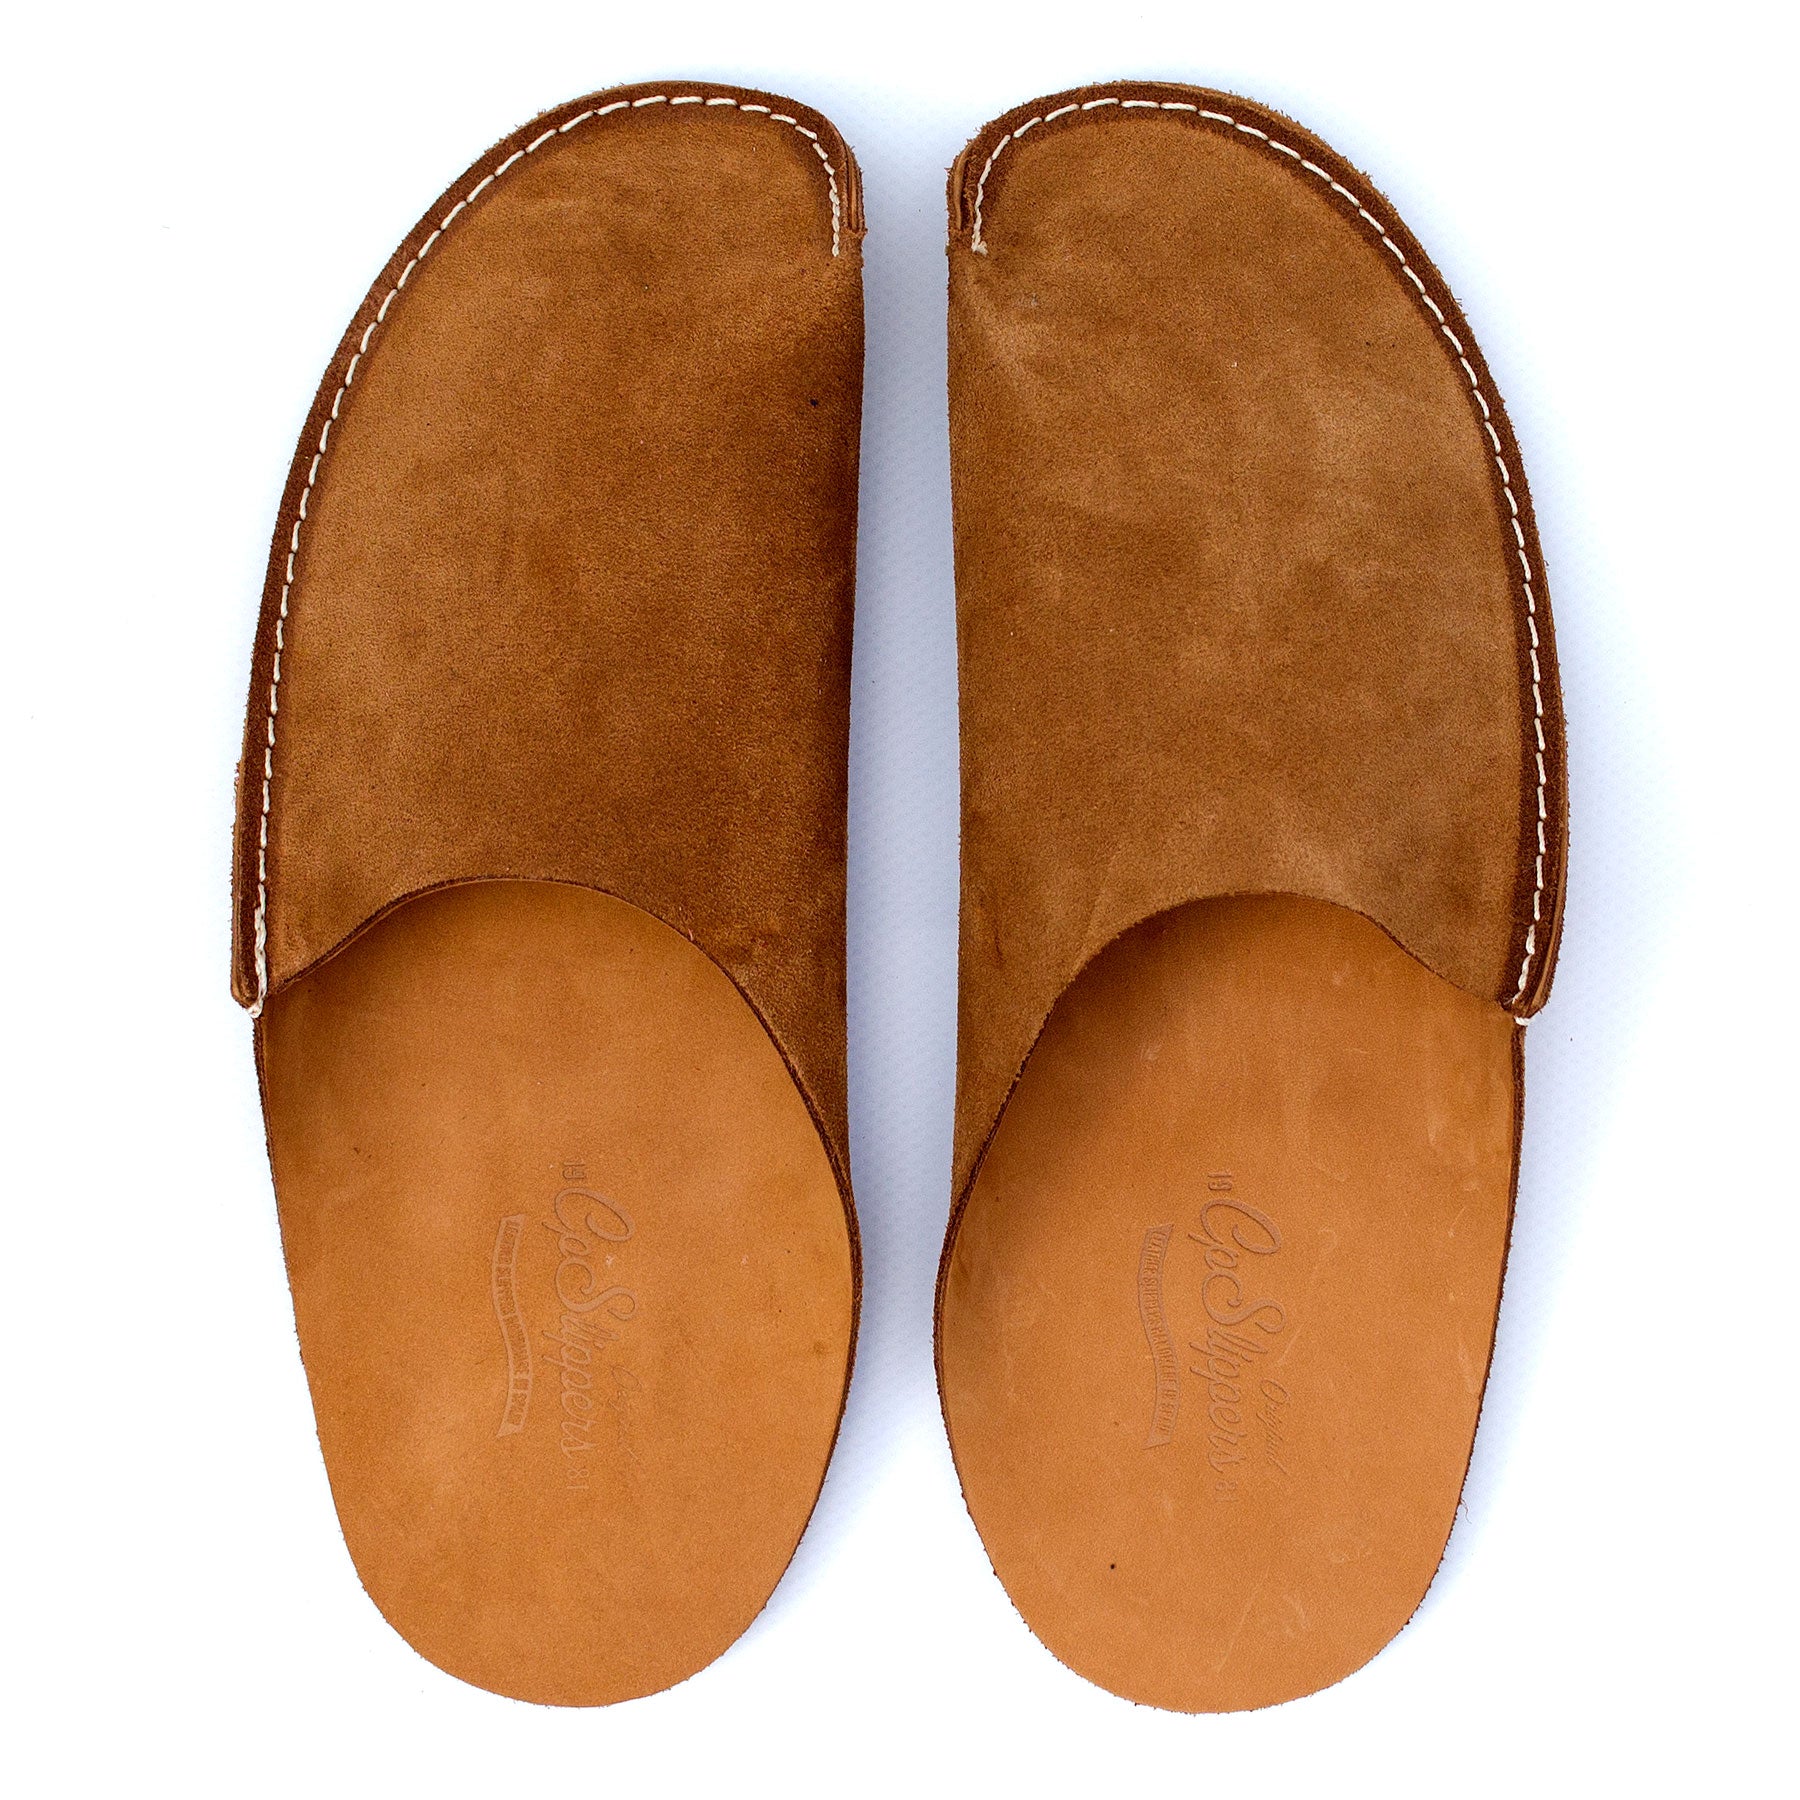 Tan CP Slippers minimalist home shoes for man and woman